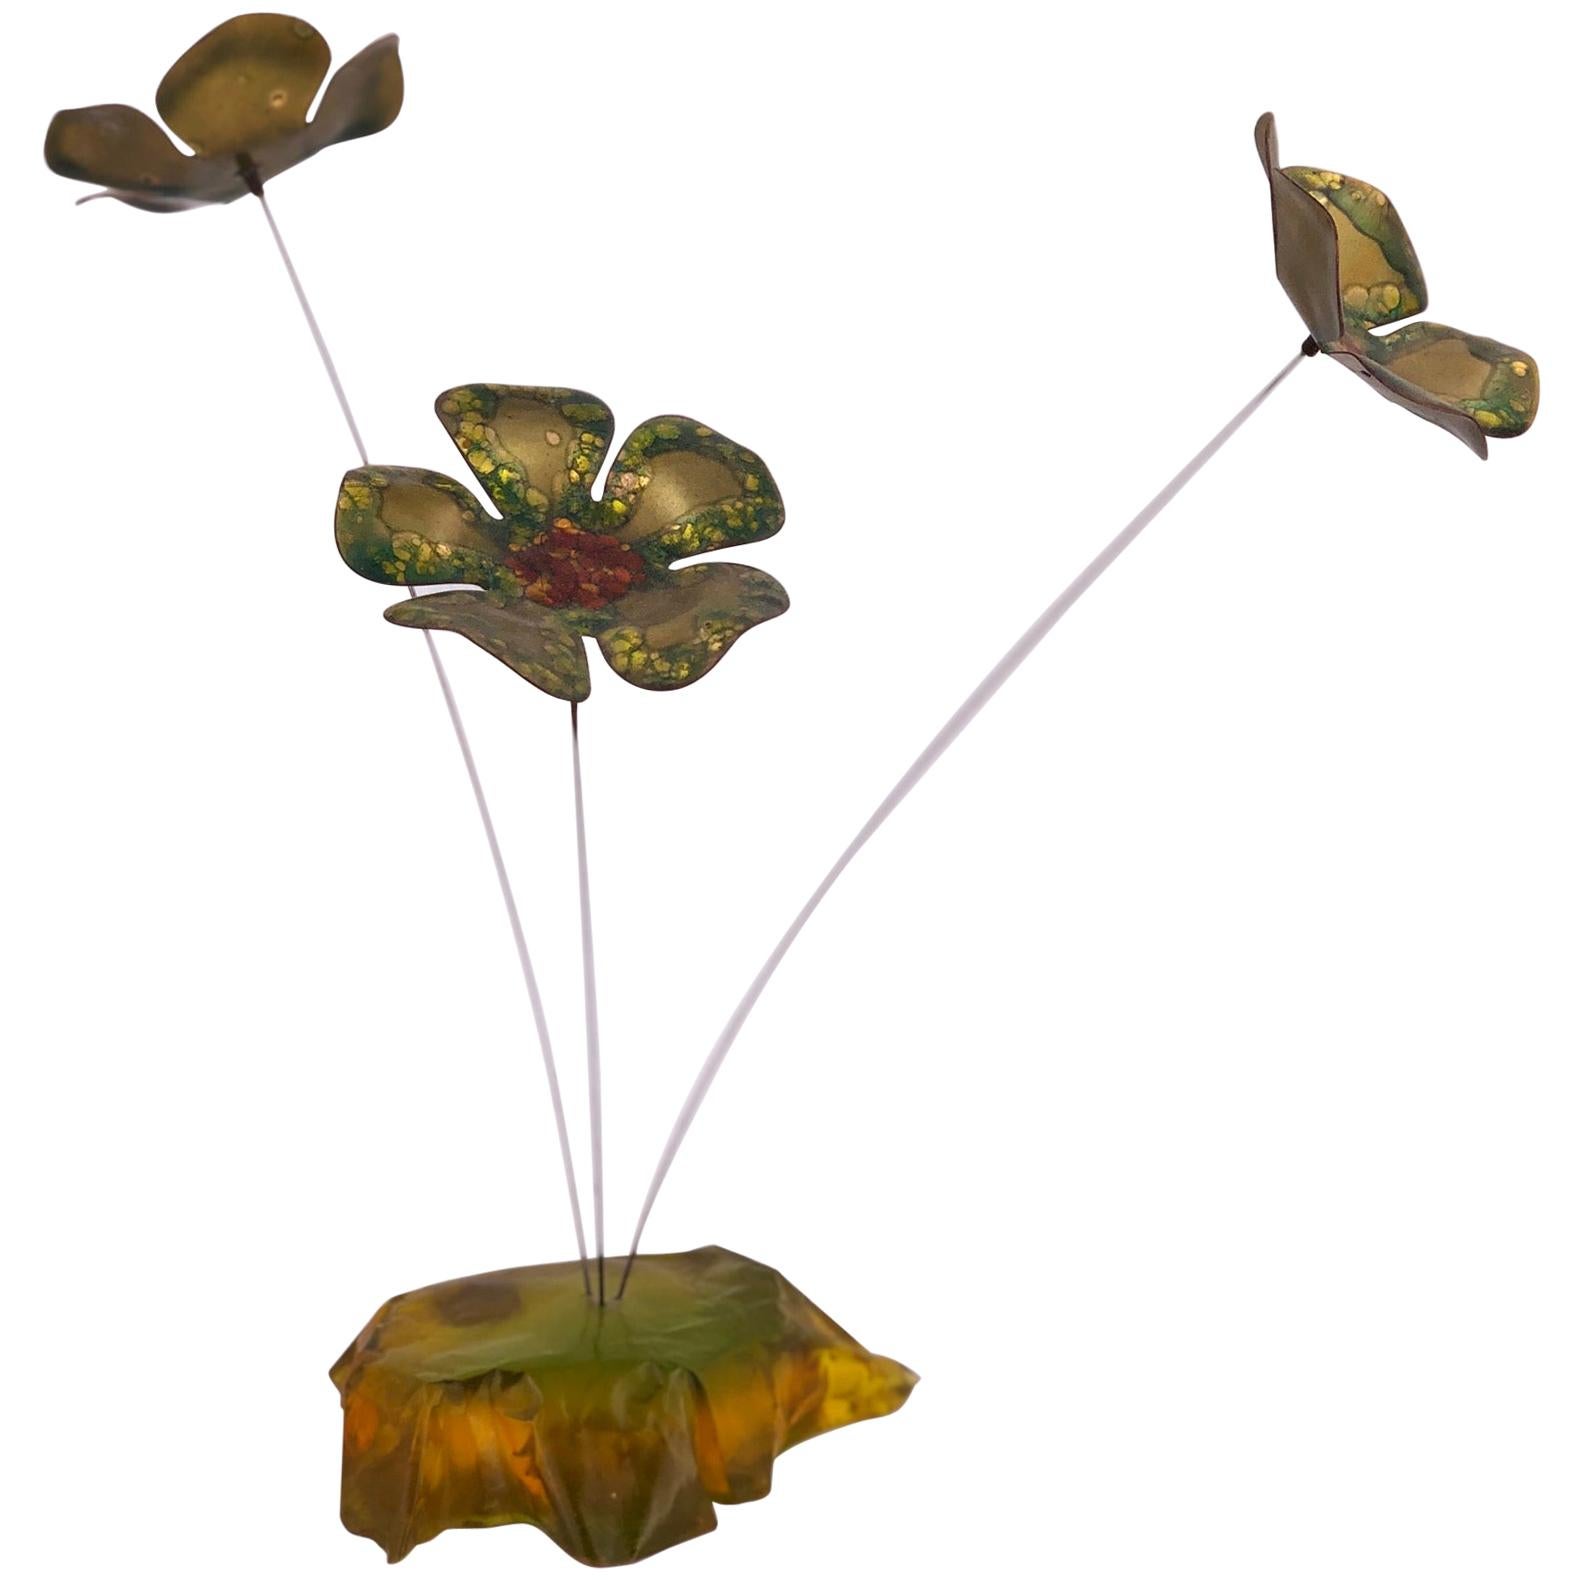 Whimsical Copper on Enamel Flowers Sculpture in the Style of Curtis Jere